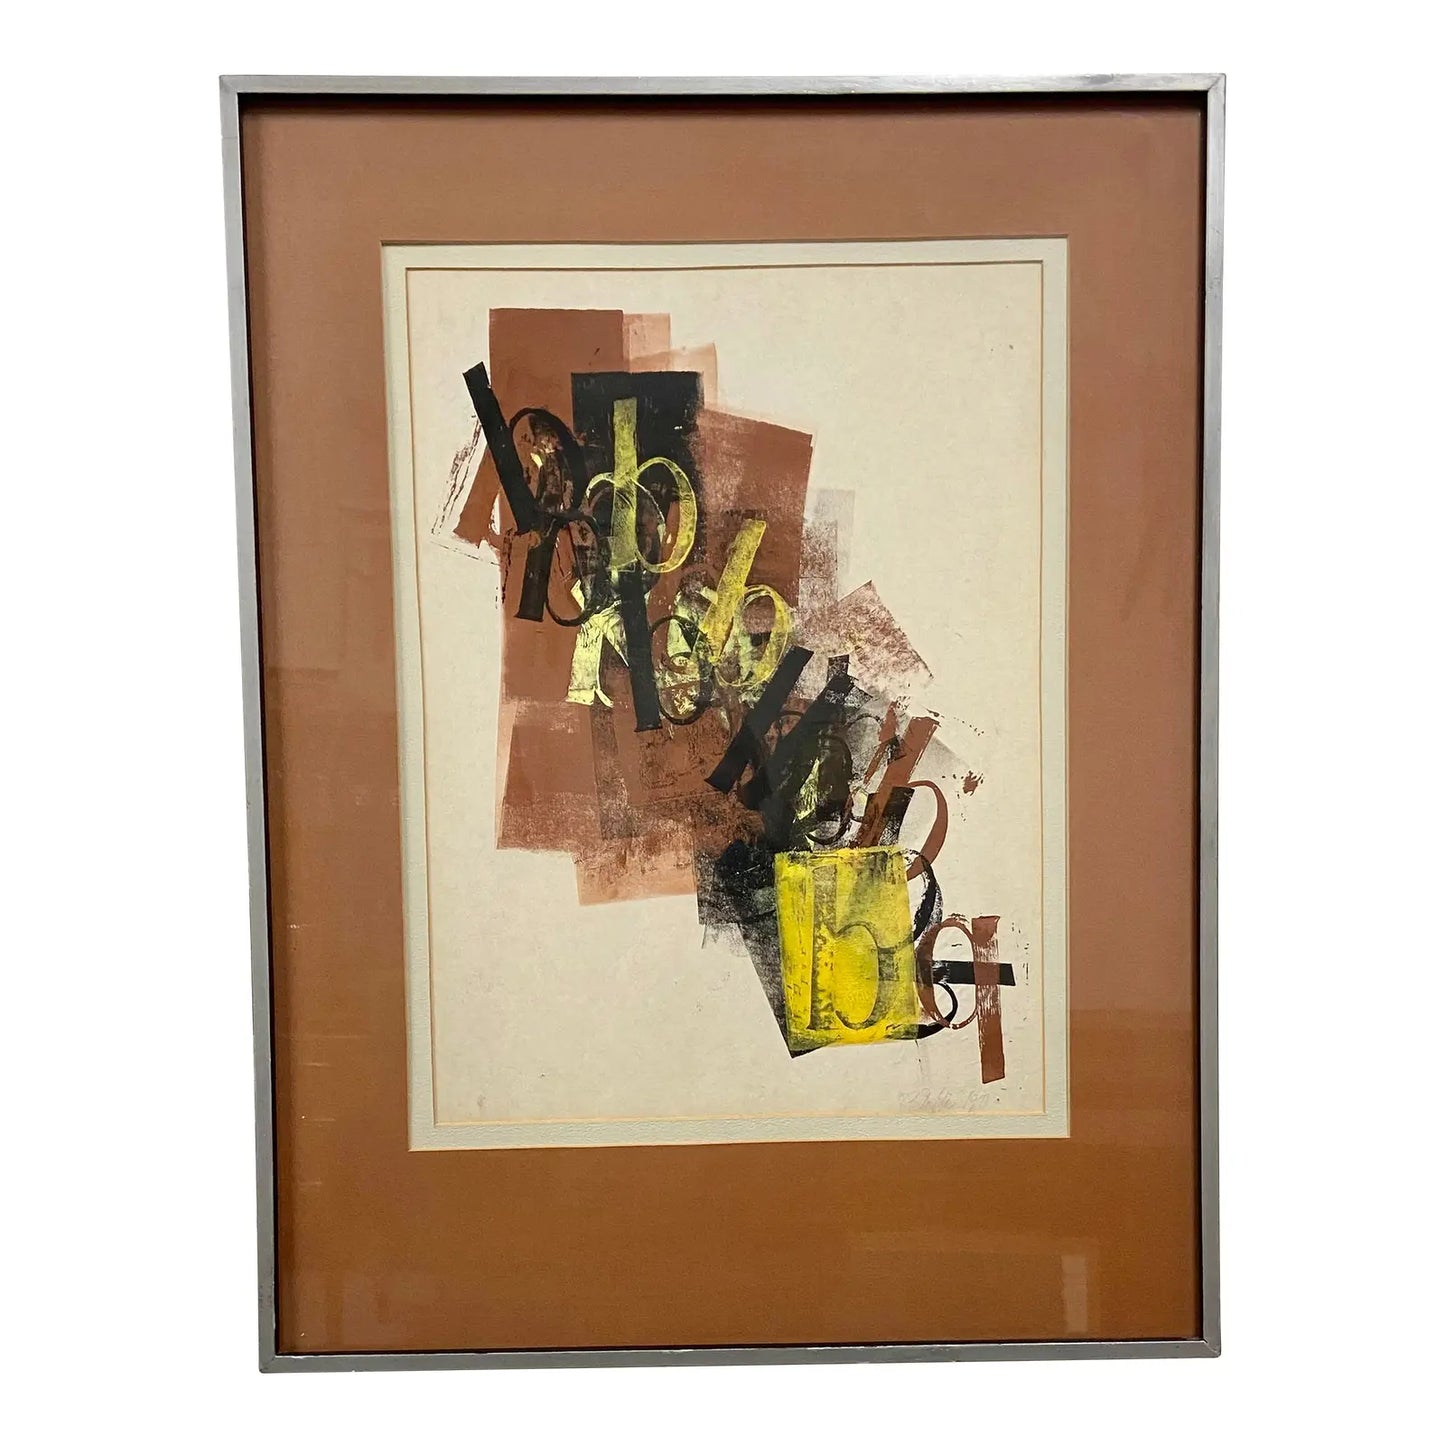 FRAMED SIGNED ABSTRACT TYPOGRAPHY SCREEN PRINT